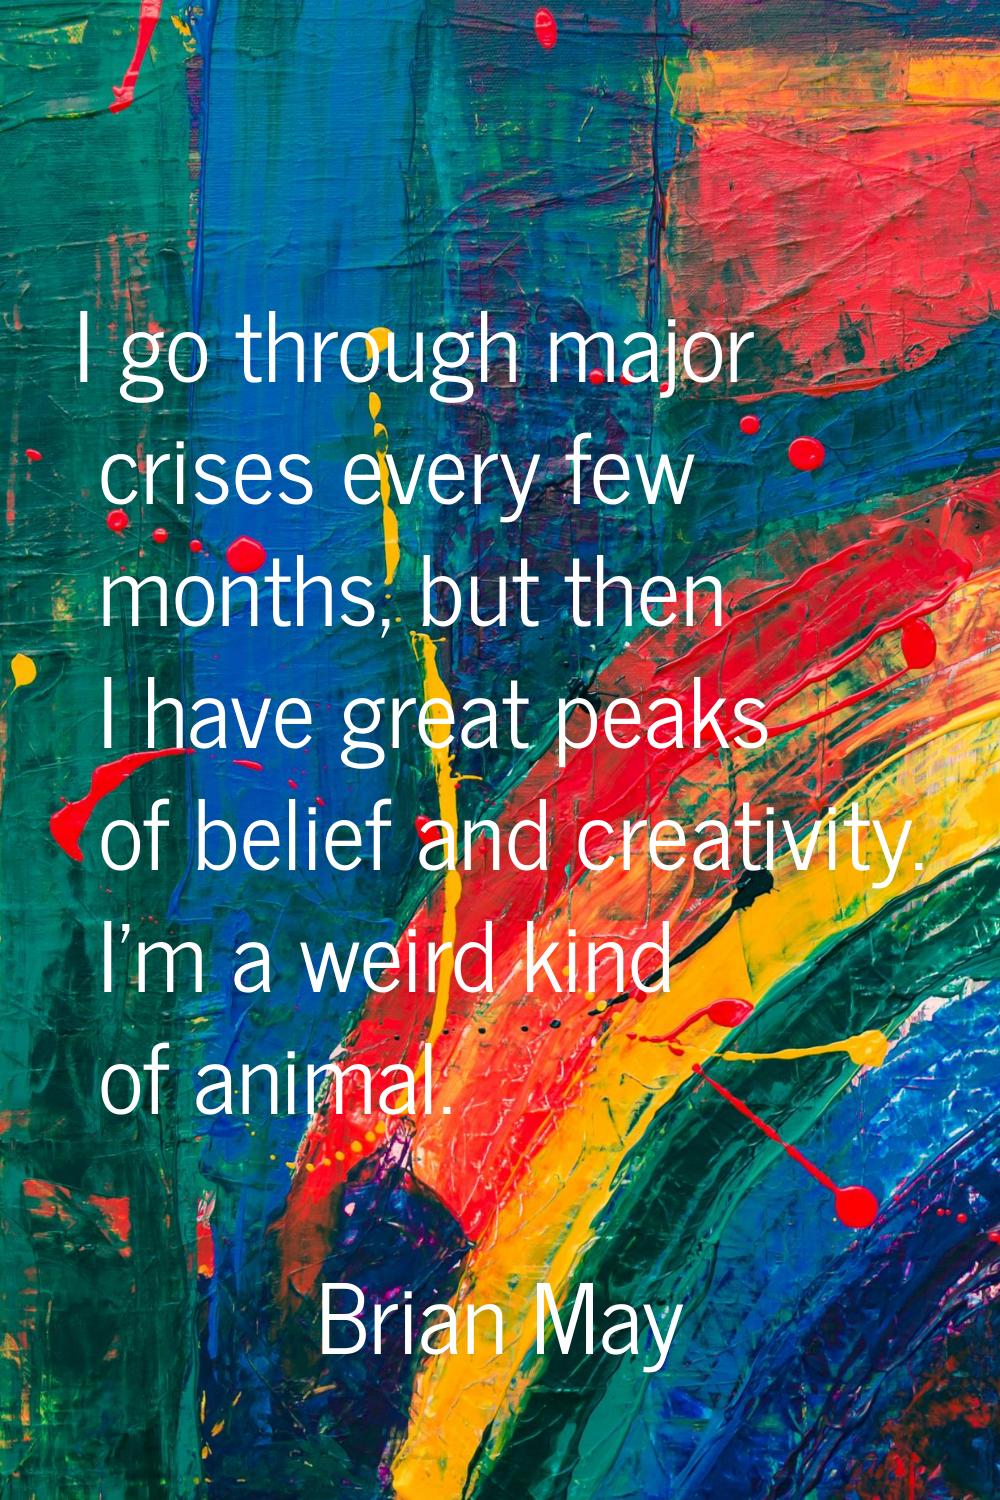 I go through major crises every few months, but then I have great peaks of belief and creativity. I